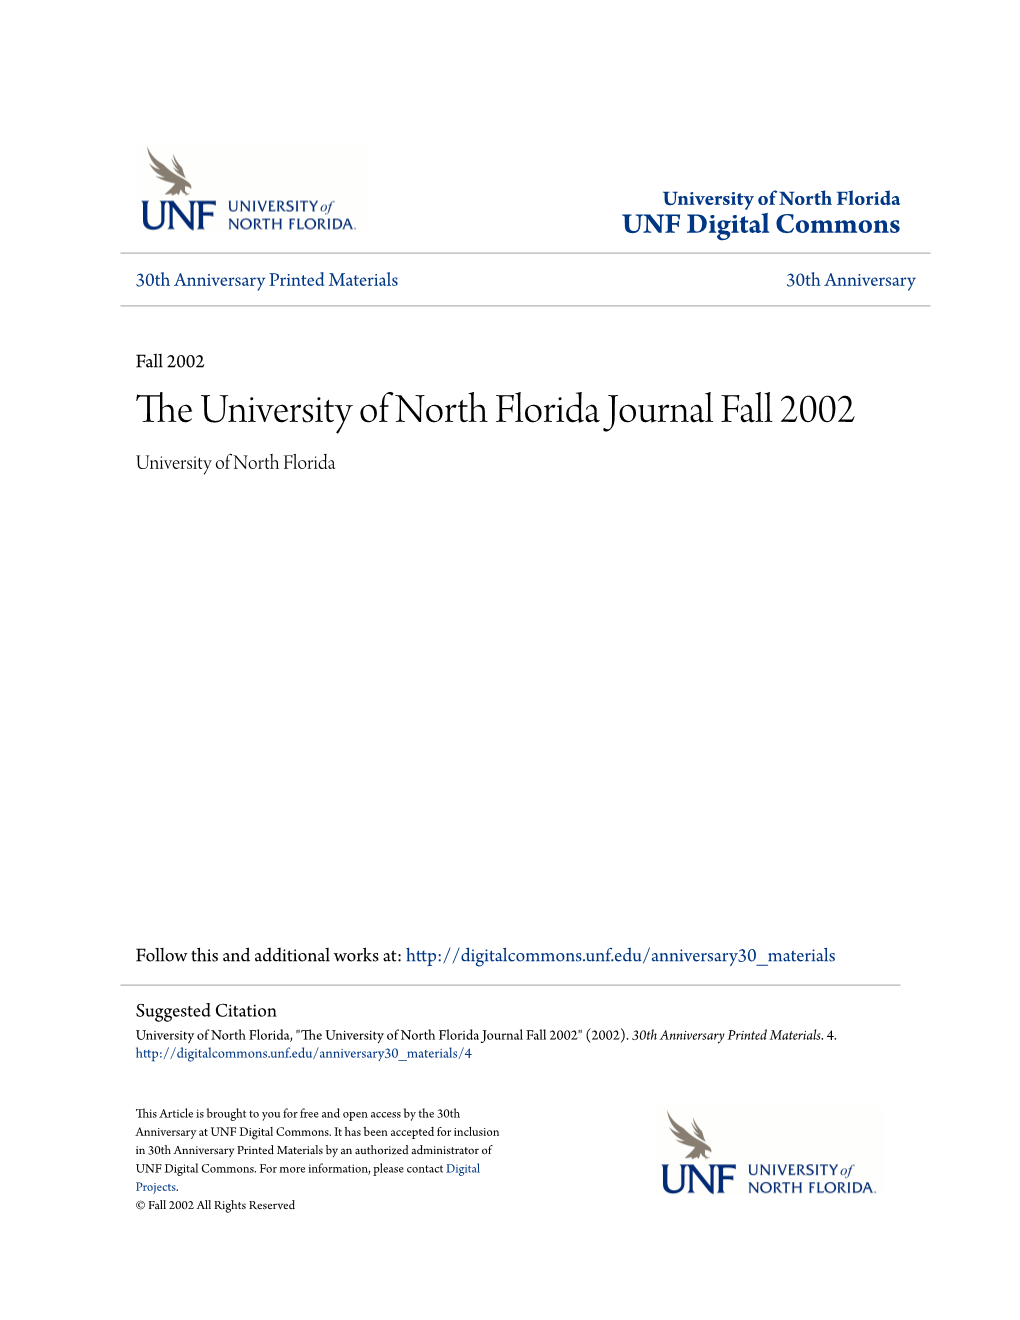 The University of North Florida Journal Fall 2002